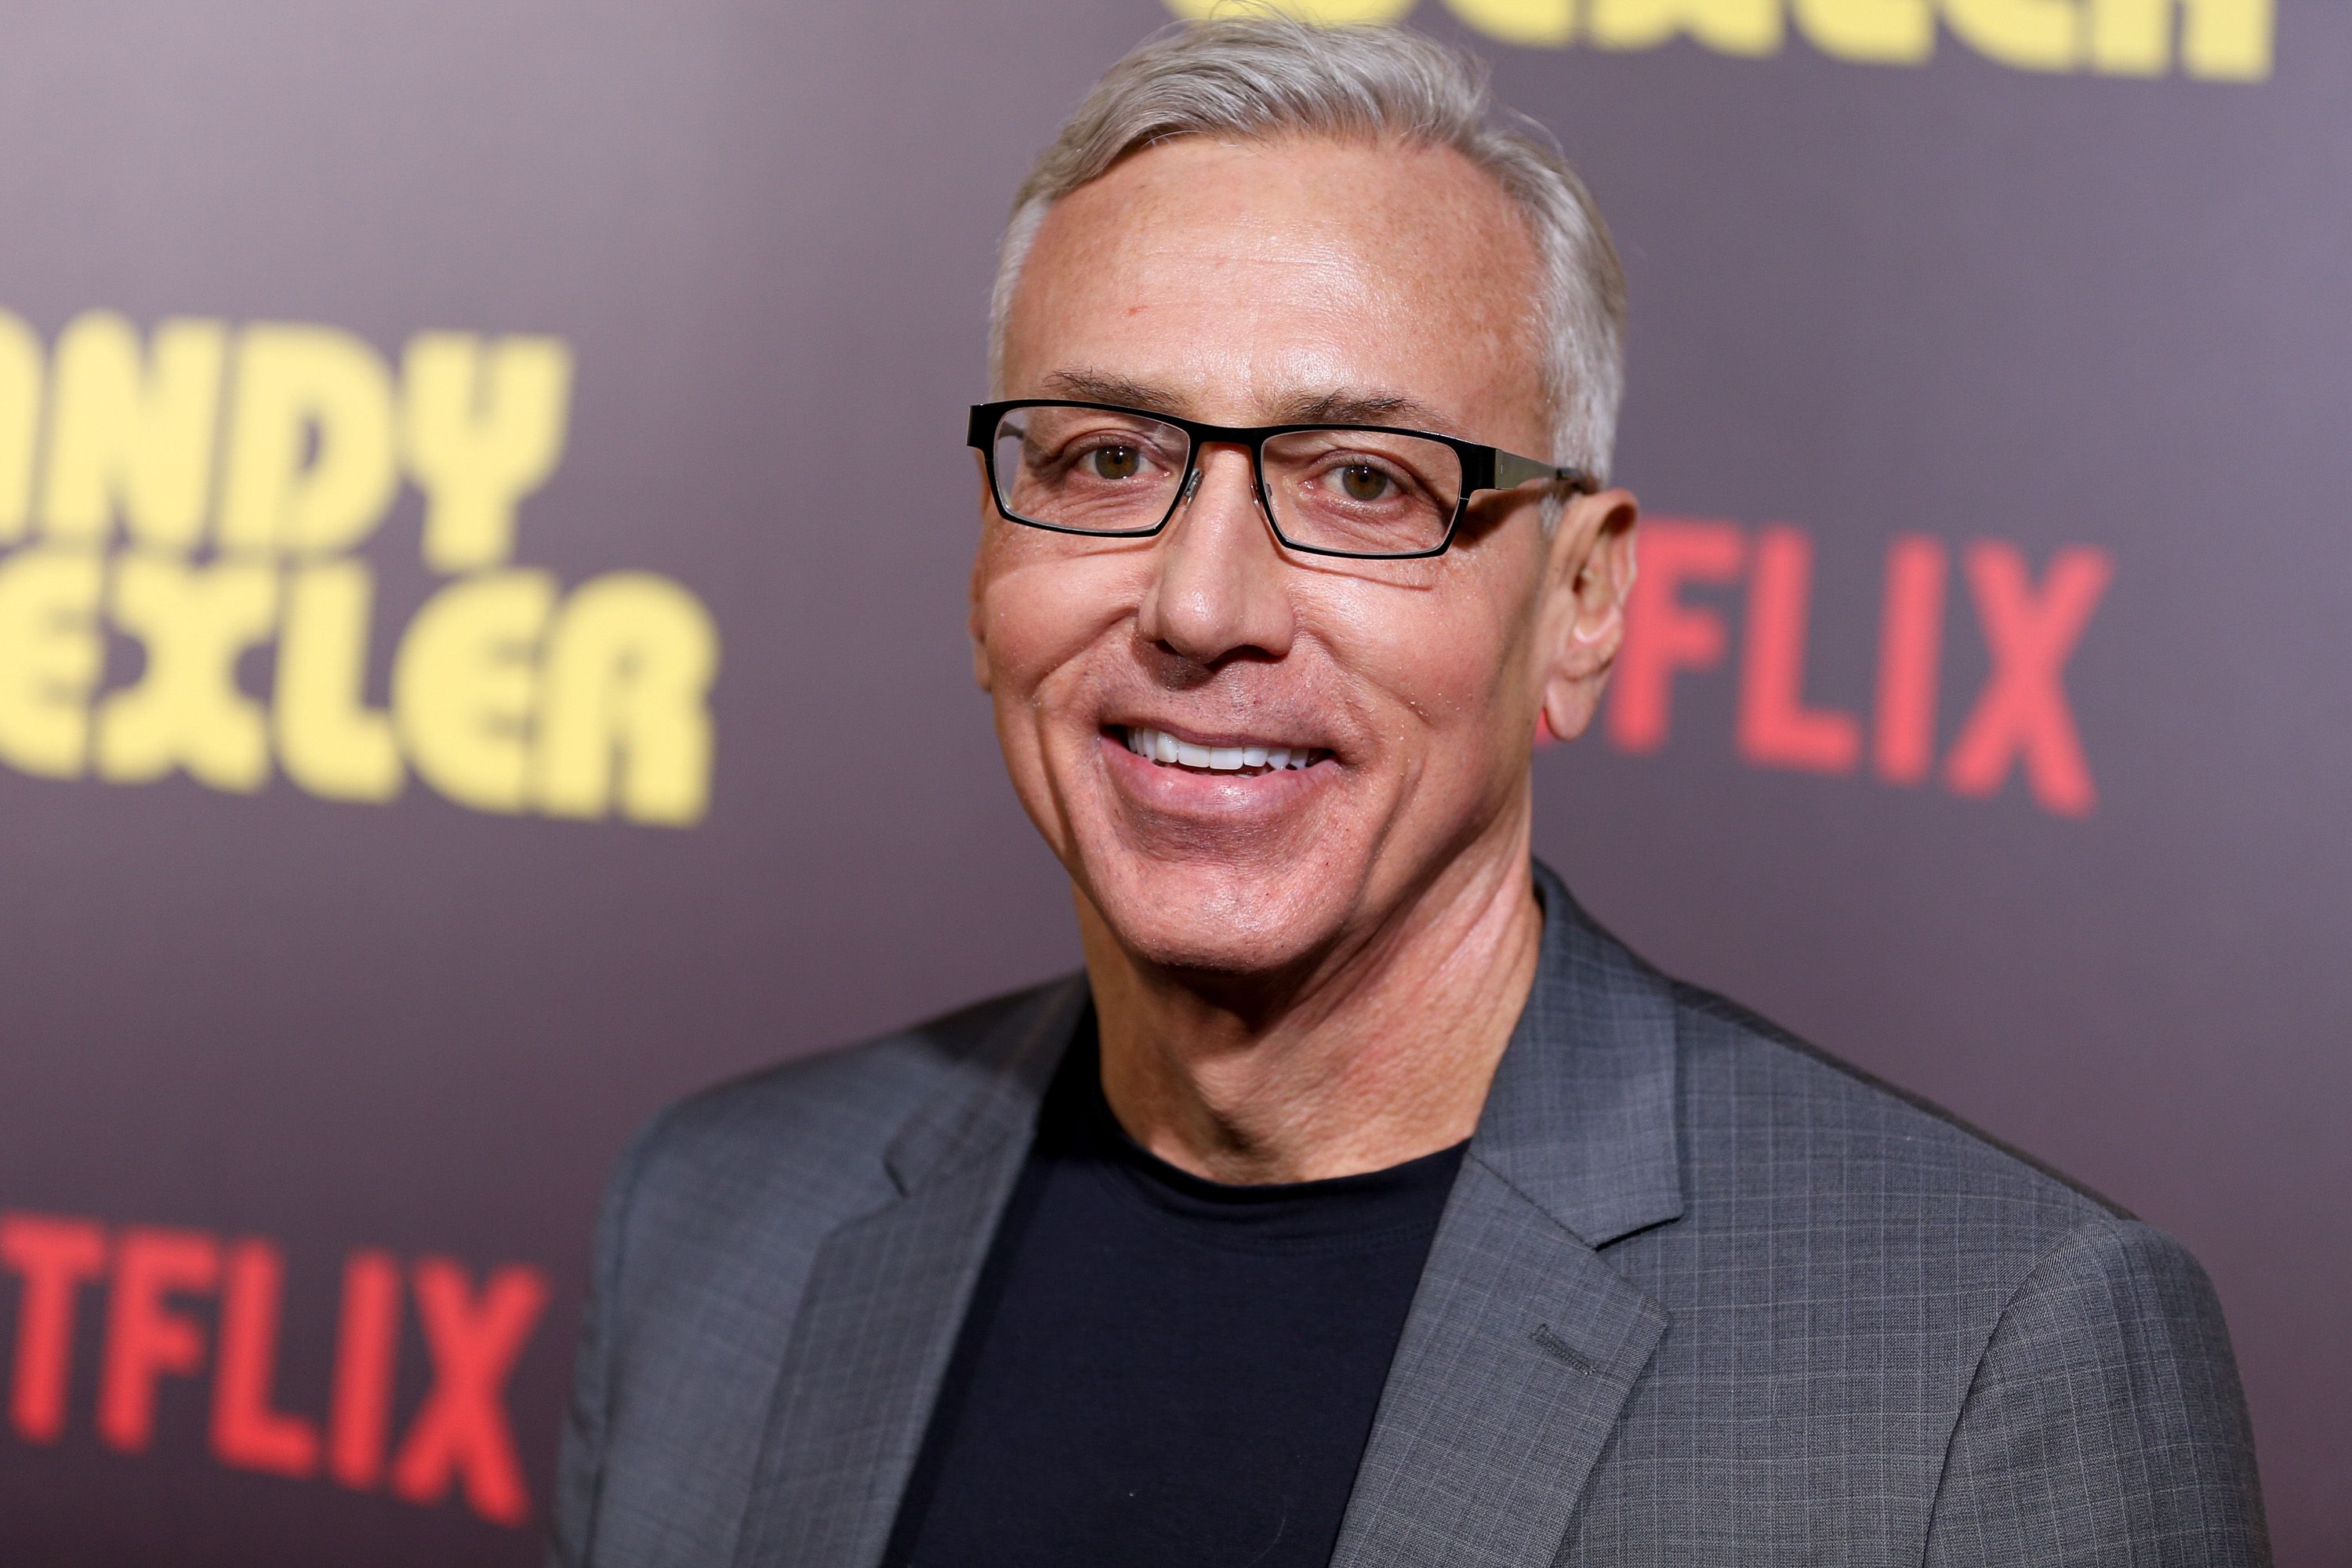 Dr. Drew Pinsky attends the premiere of "Sandy Wexler" at the ArcLight Cinemas Cinerama Dome on April 6, 2017 in Hollywood, California. | Photo: Getty Images